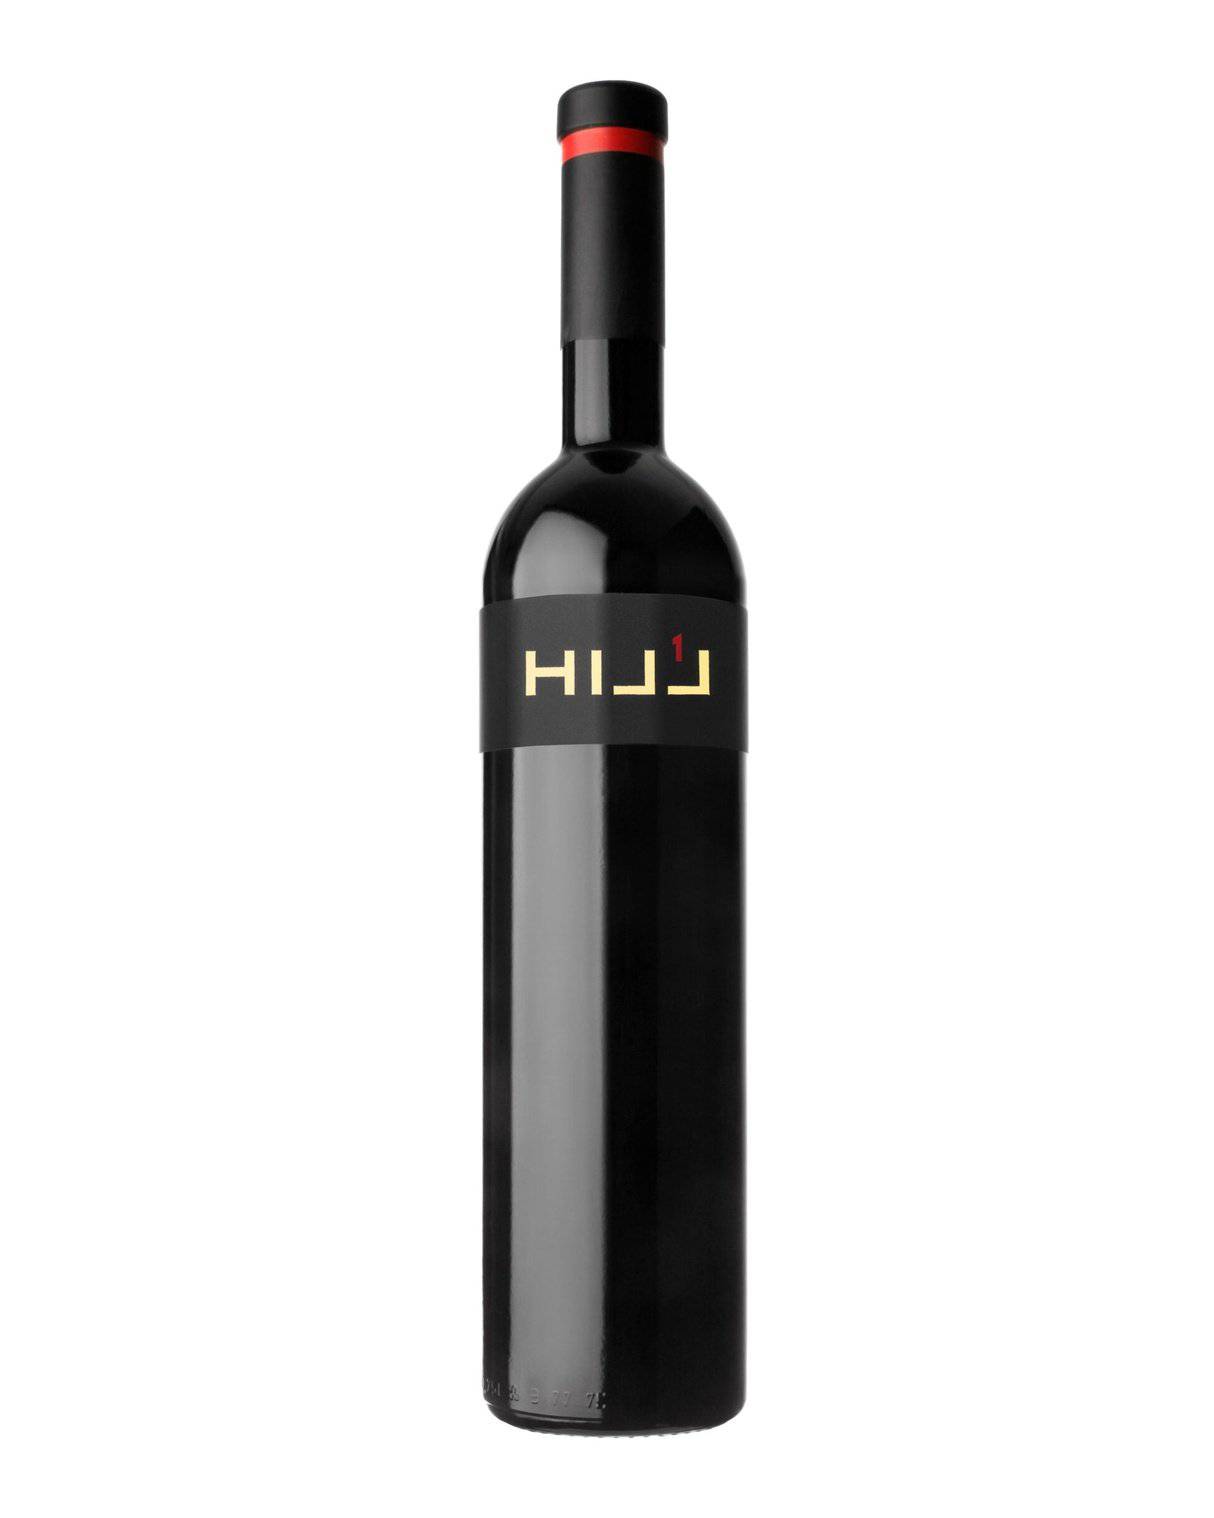 Hill 1 2018  Cuvée Rot - GrapeFactory GmbH